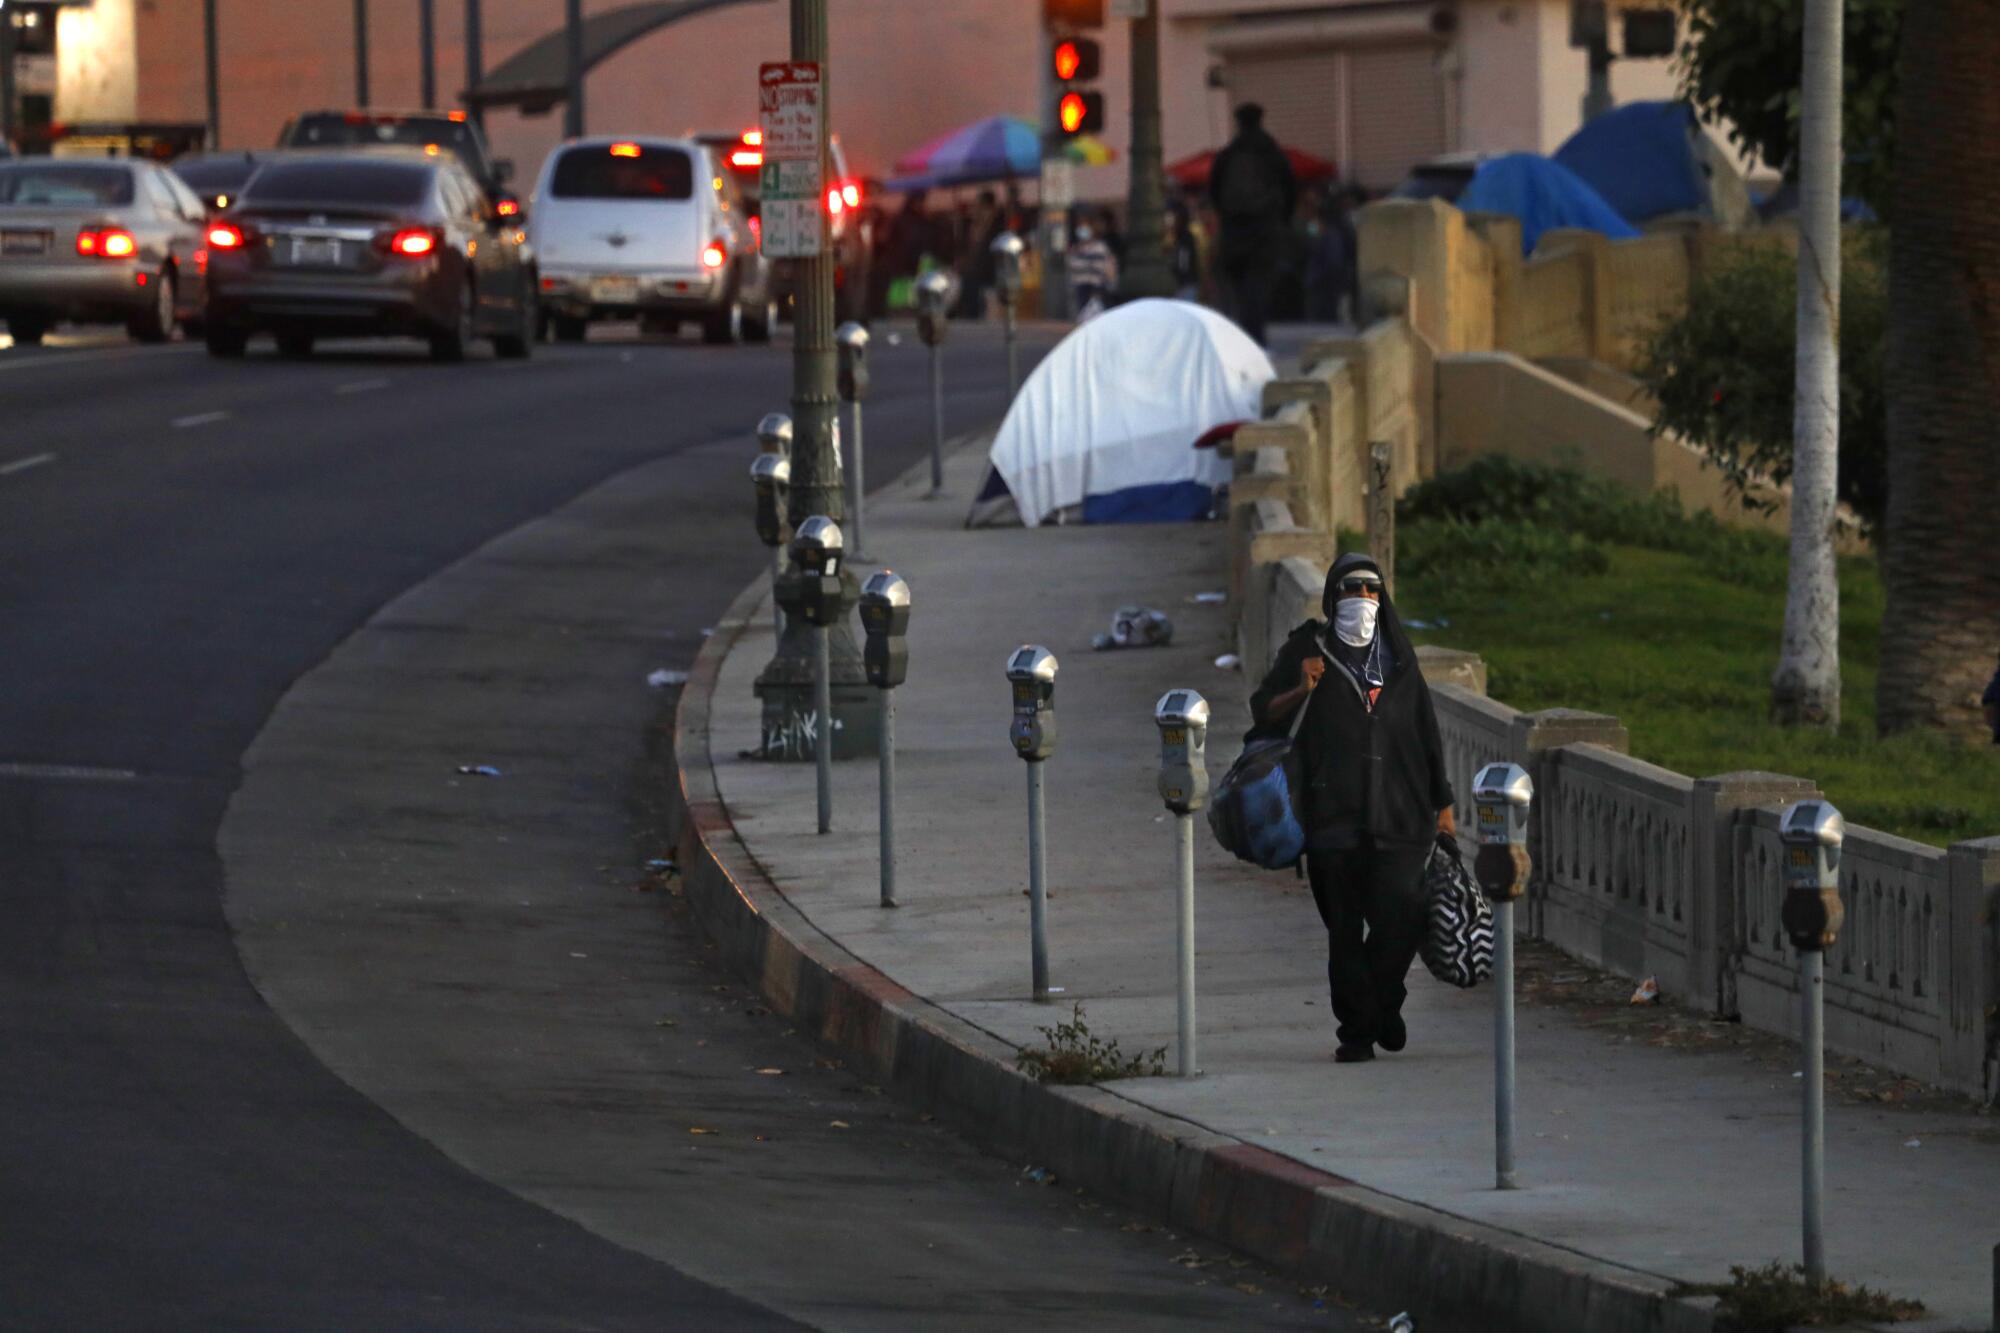 A person in a face covering walks on a city sidewalk with a tent and vendors' carts in the background